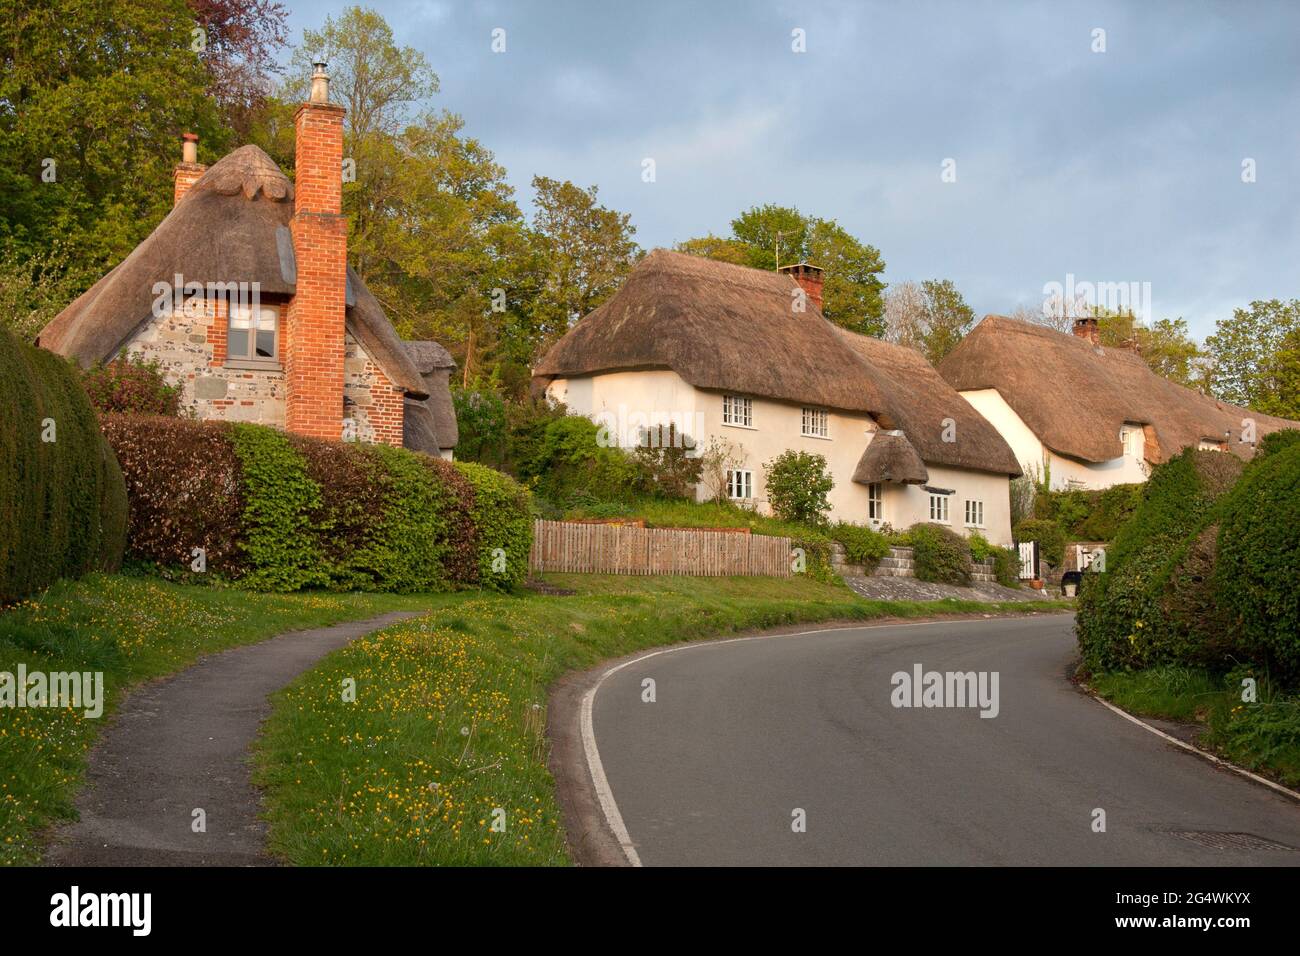 Thatched cottages in Stapleford, Till Valley, Salisbury, Wiltshire, England Stock Photo